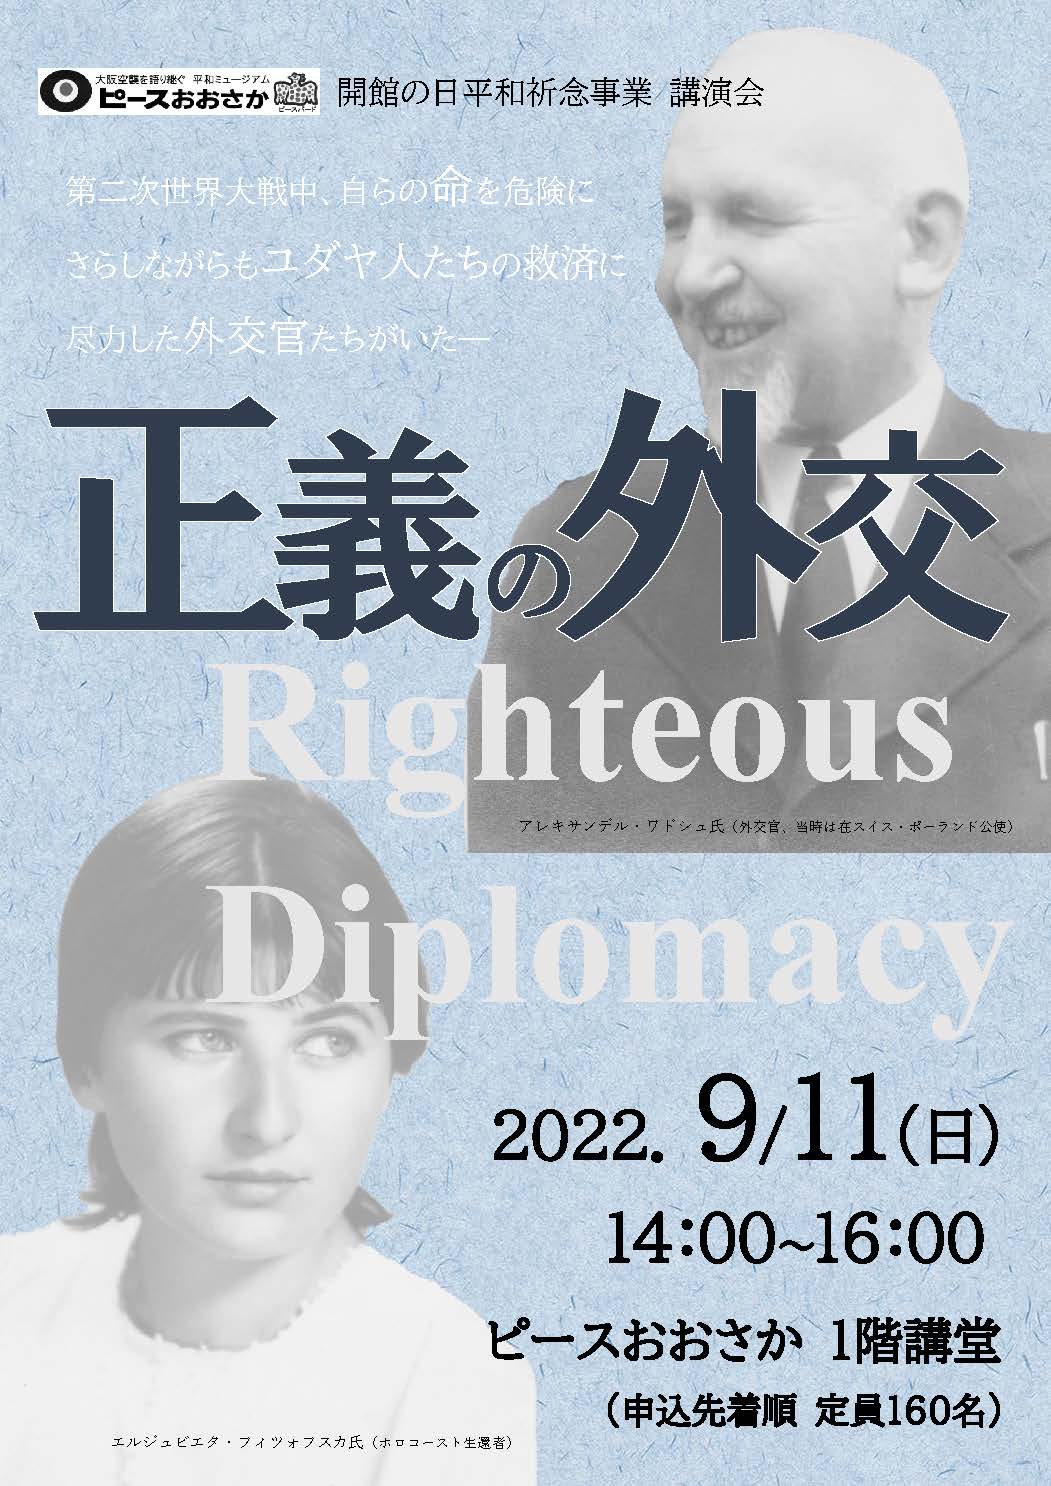 The conference Righteous Diplomacy in Osaka, Japan